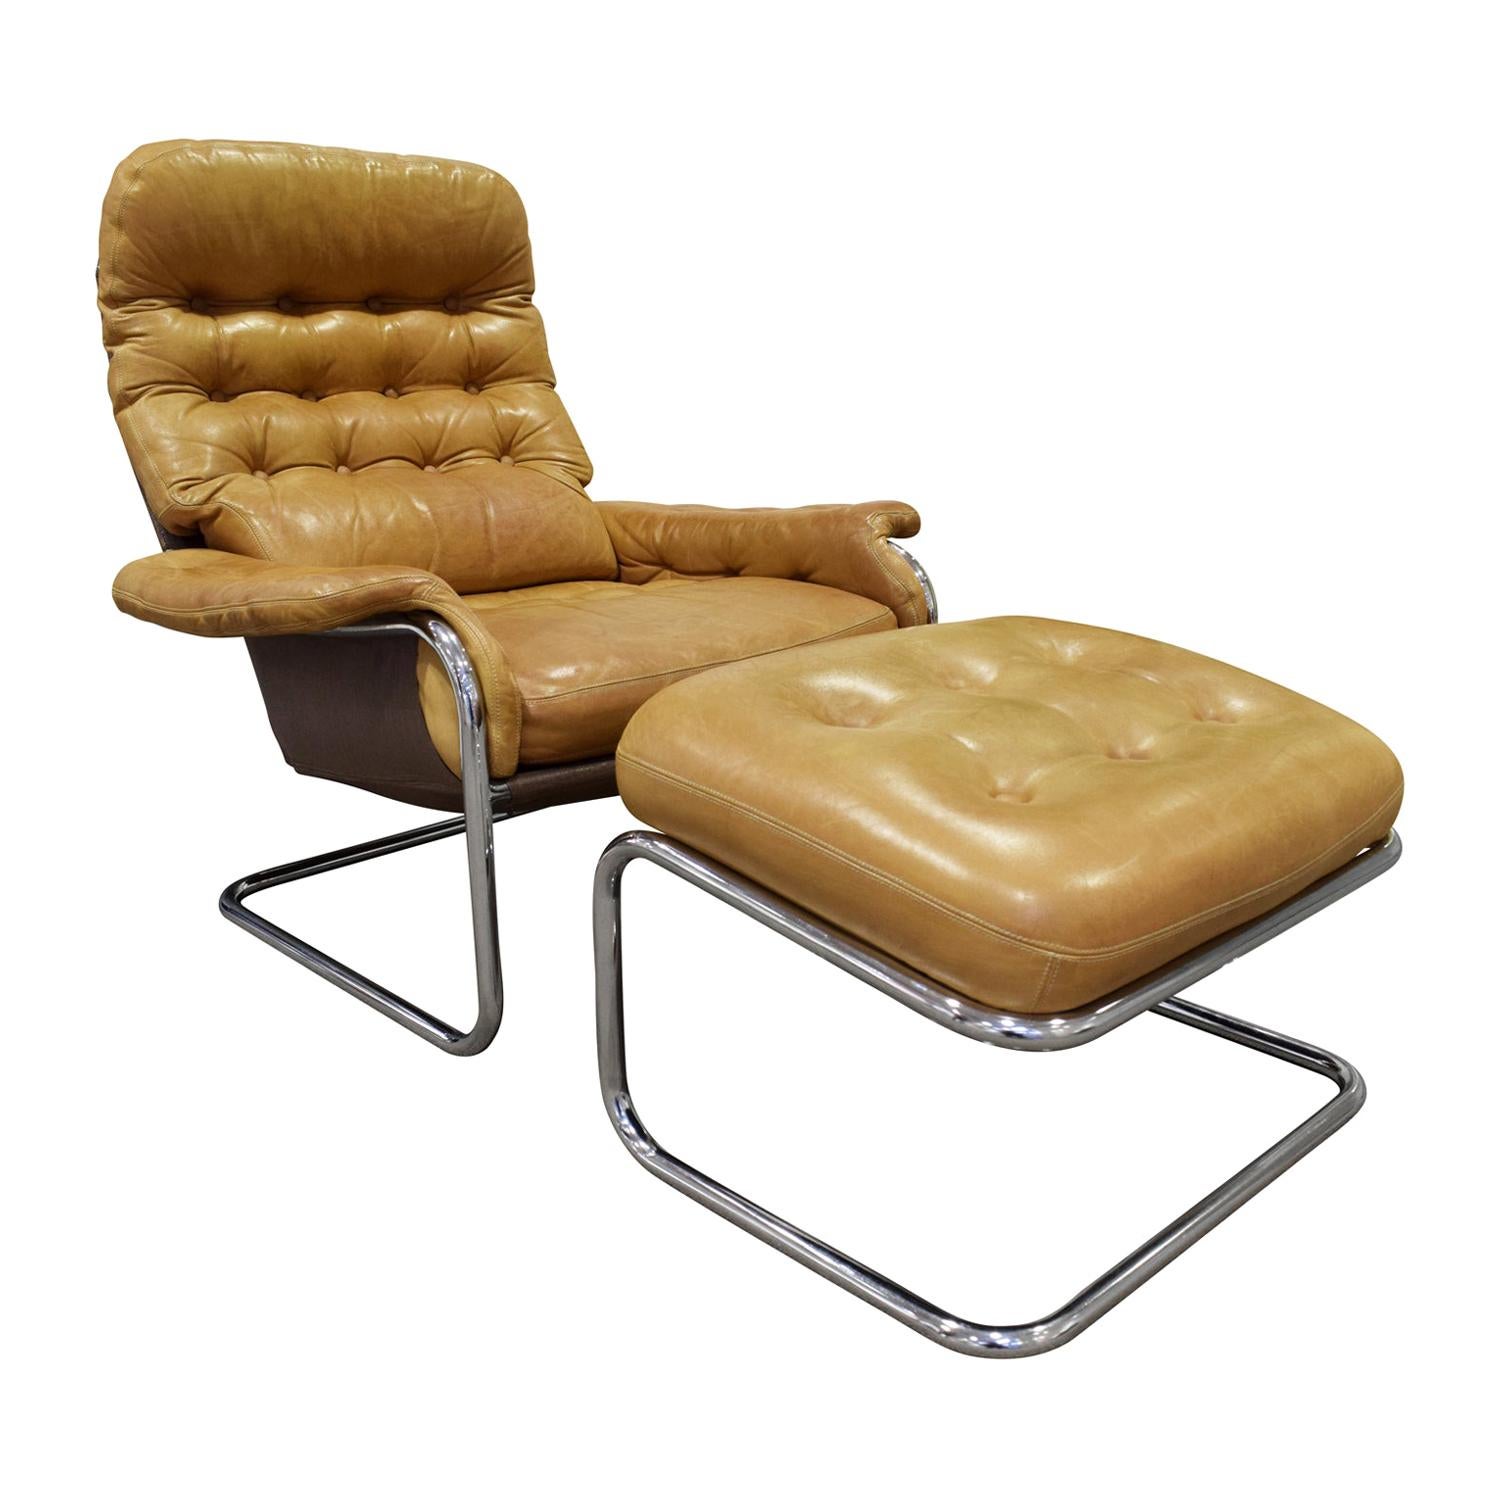 DUX Chair and Ottoman in Polished Chrome and Leather Upholstery, 1980s